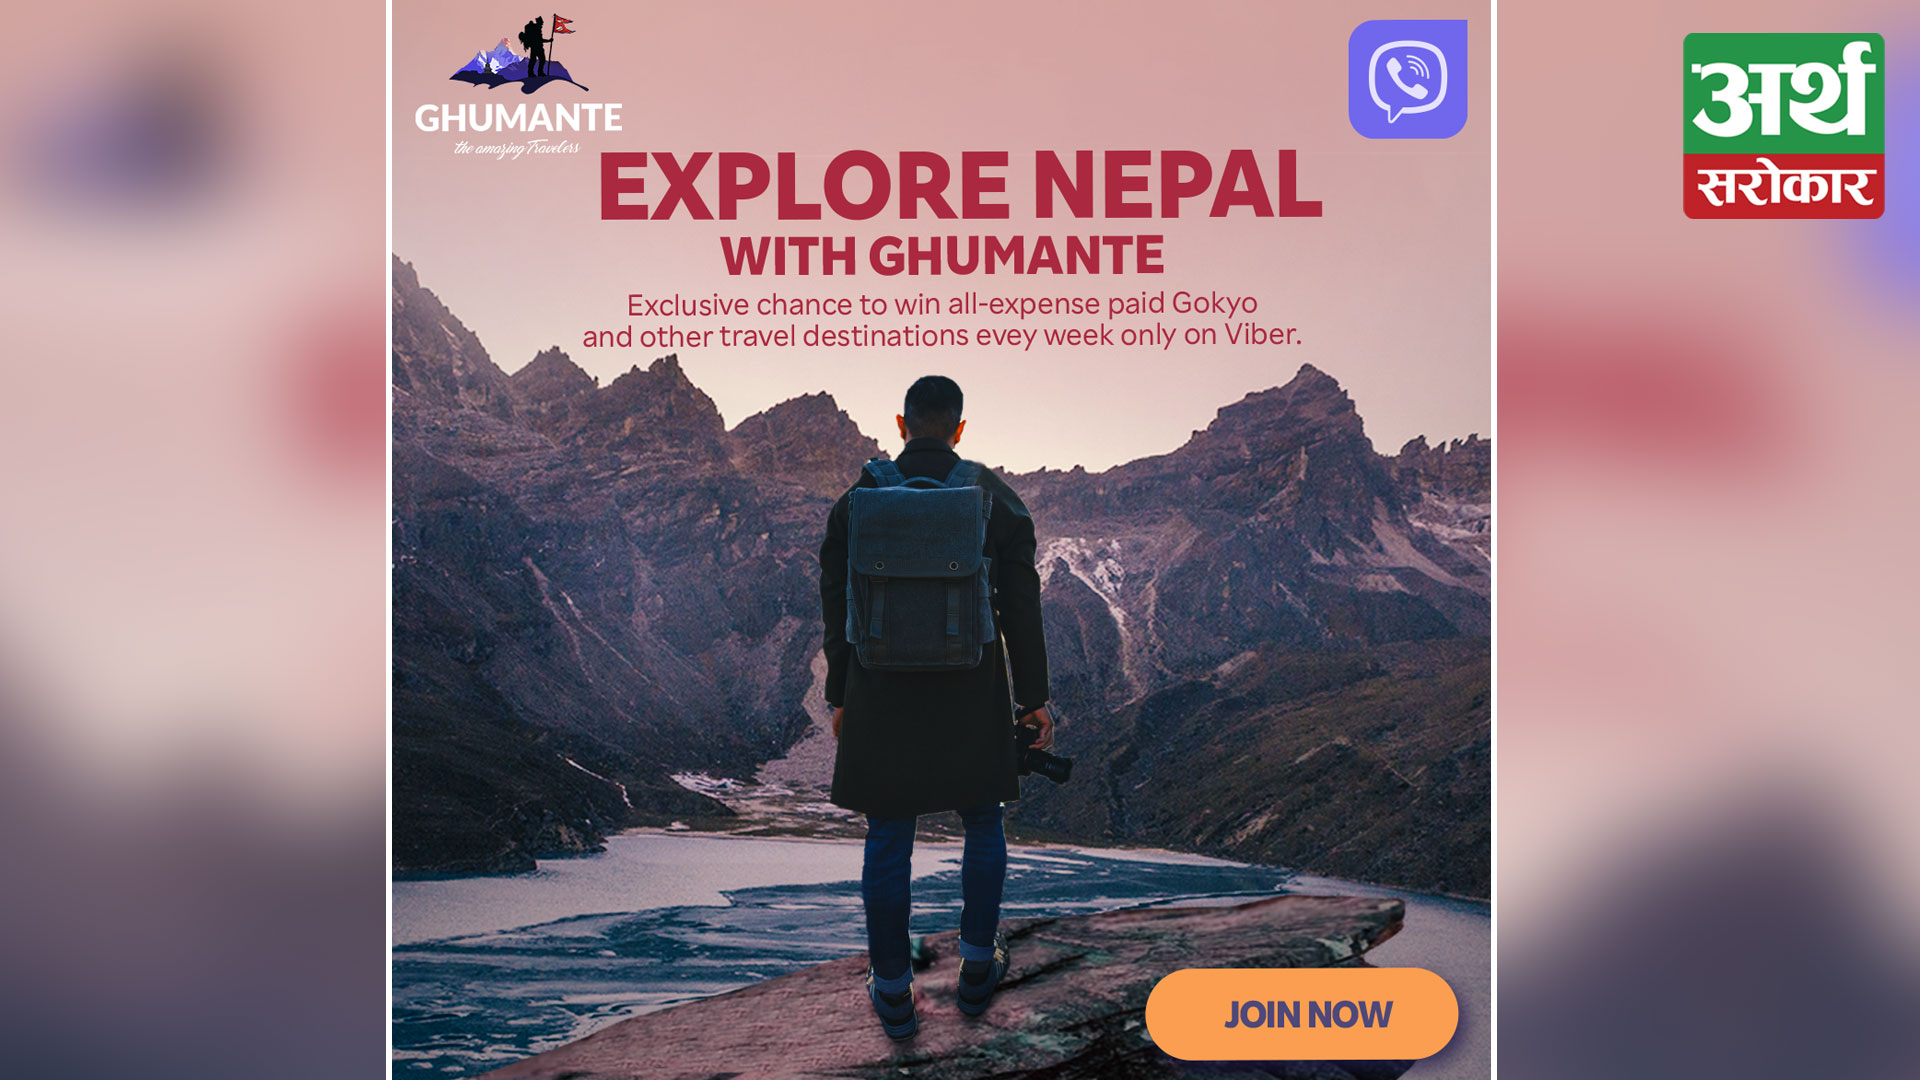 Rakuten Viber and Ghumante Take You on an Epic Journey with Explore Nepal’s Travel Campaign